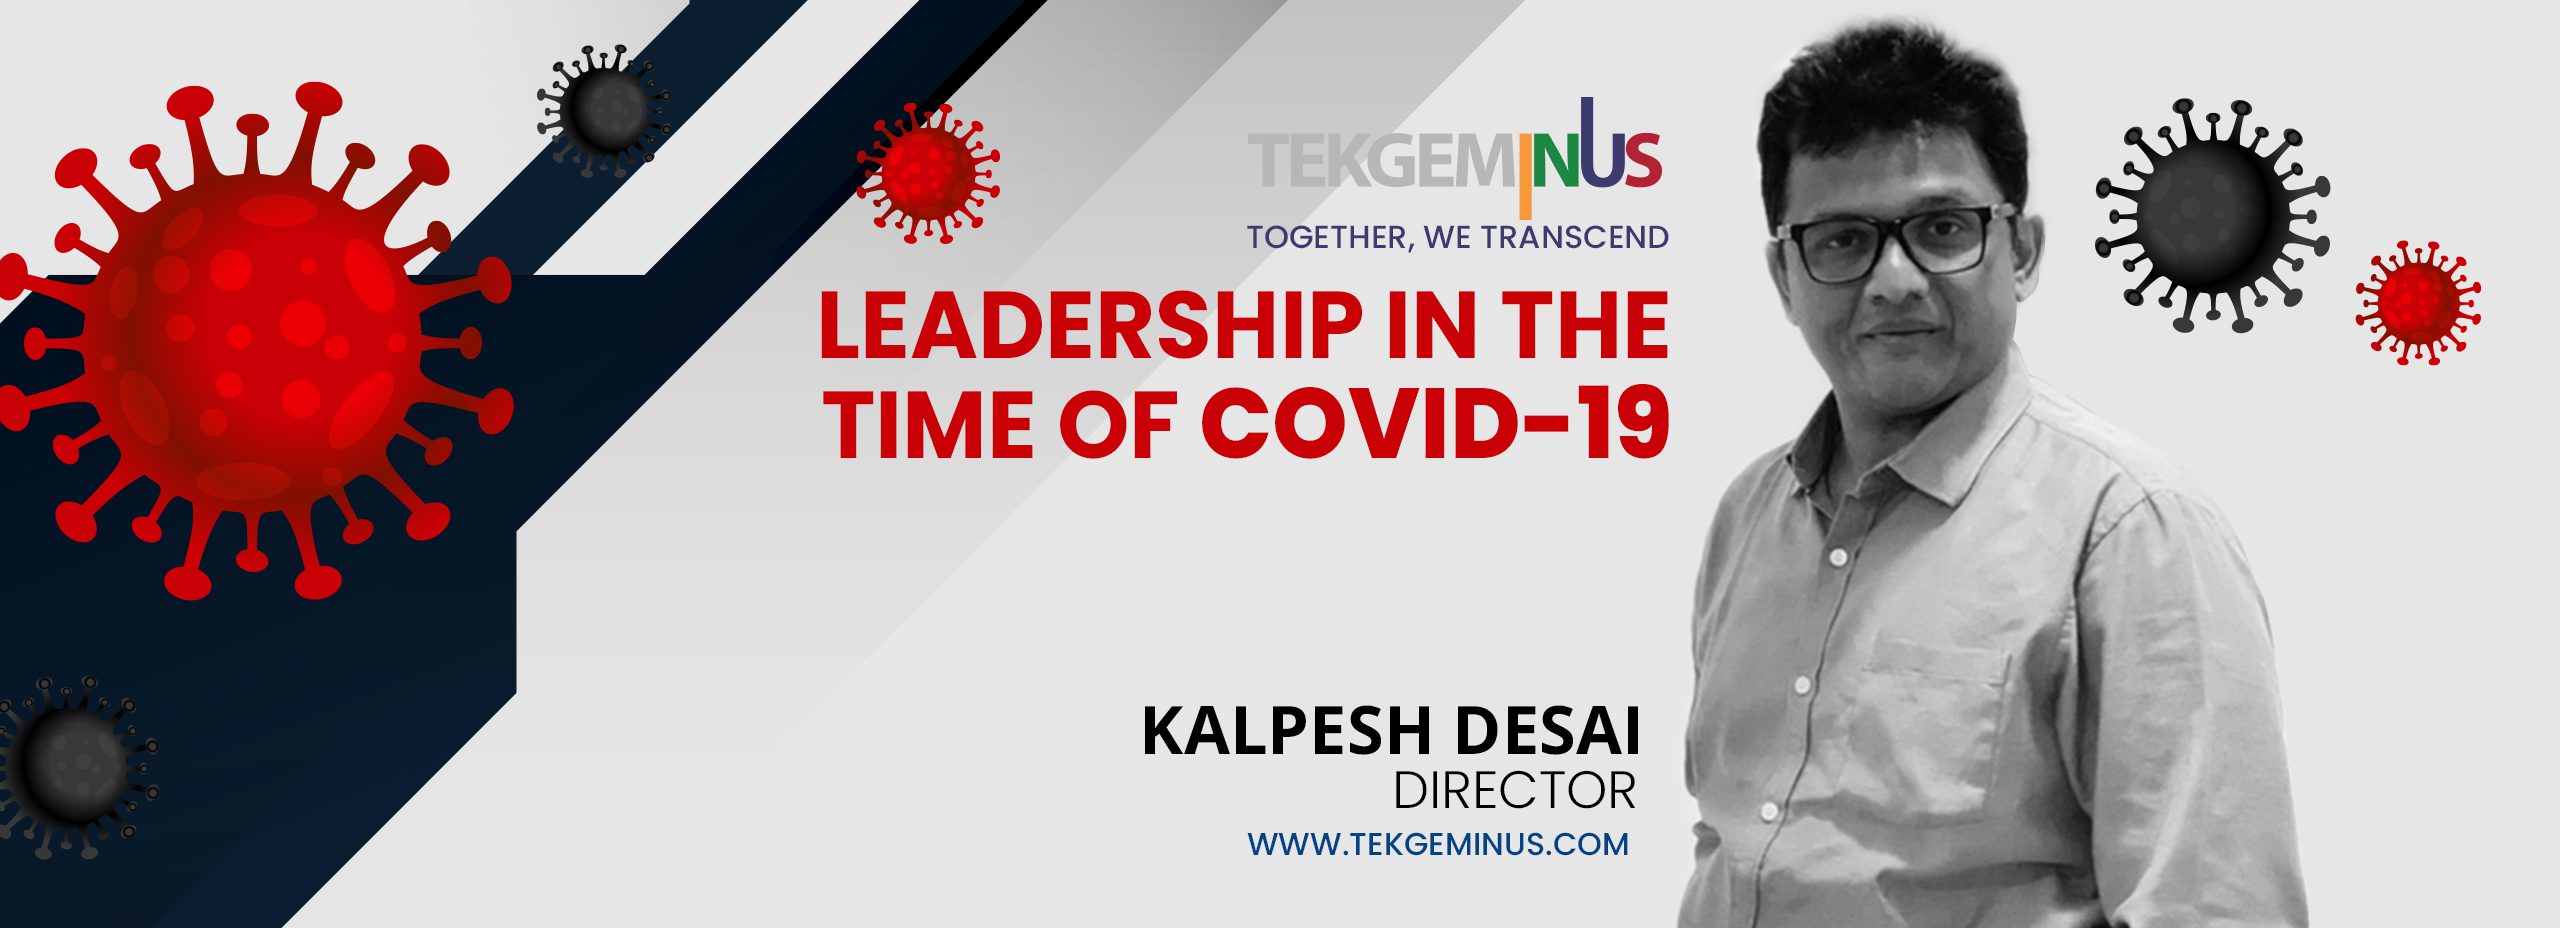 Leadership in the time of COVID-19